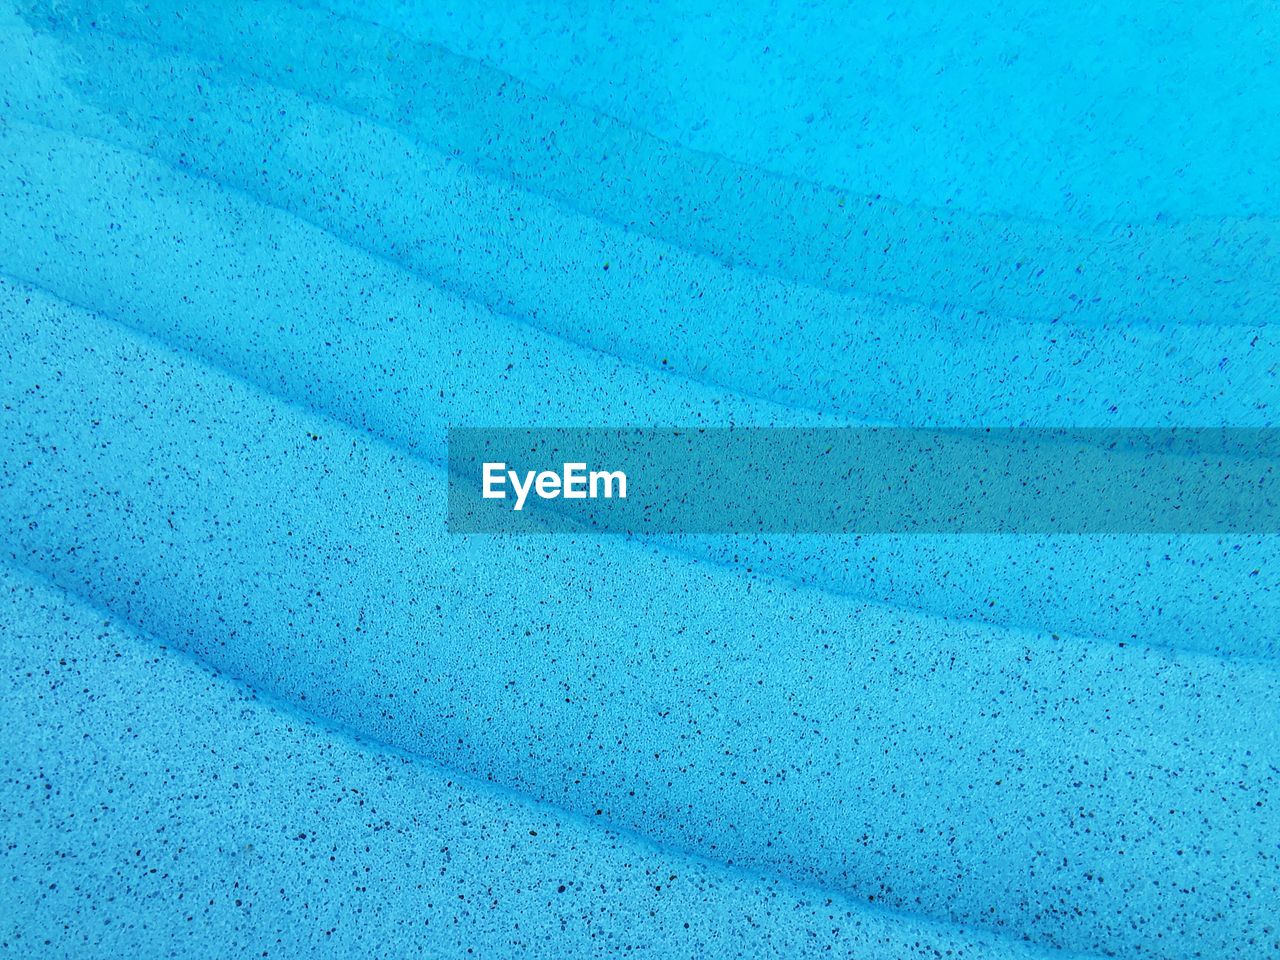 Full frame shot of blue water in a swimming pool